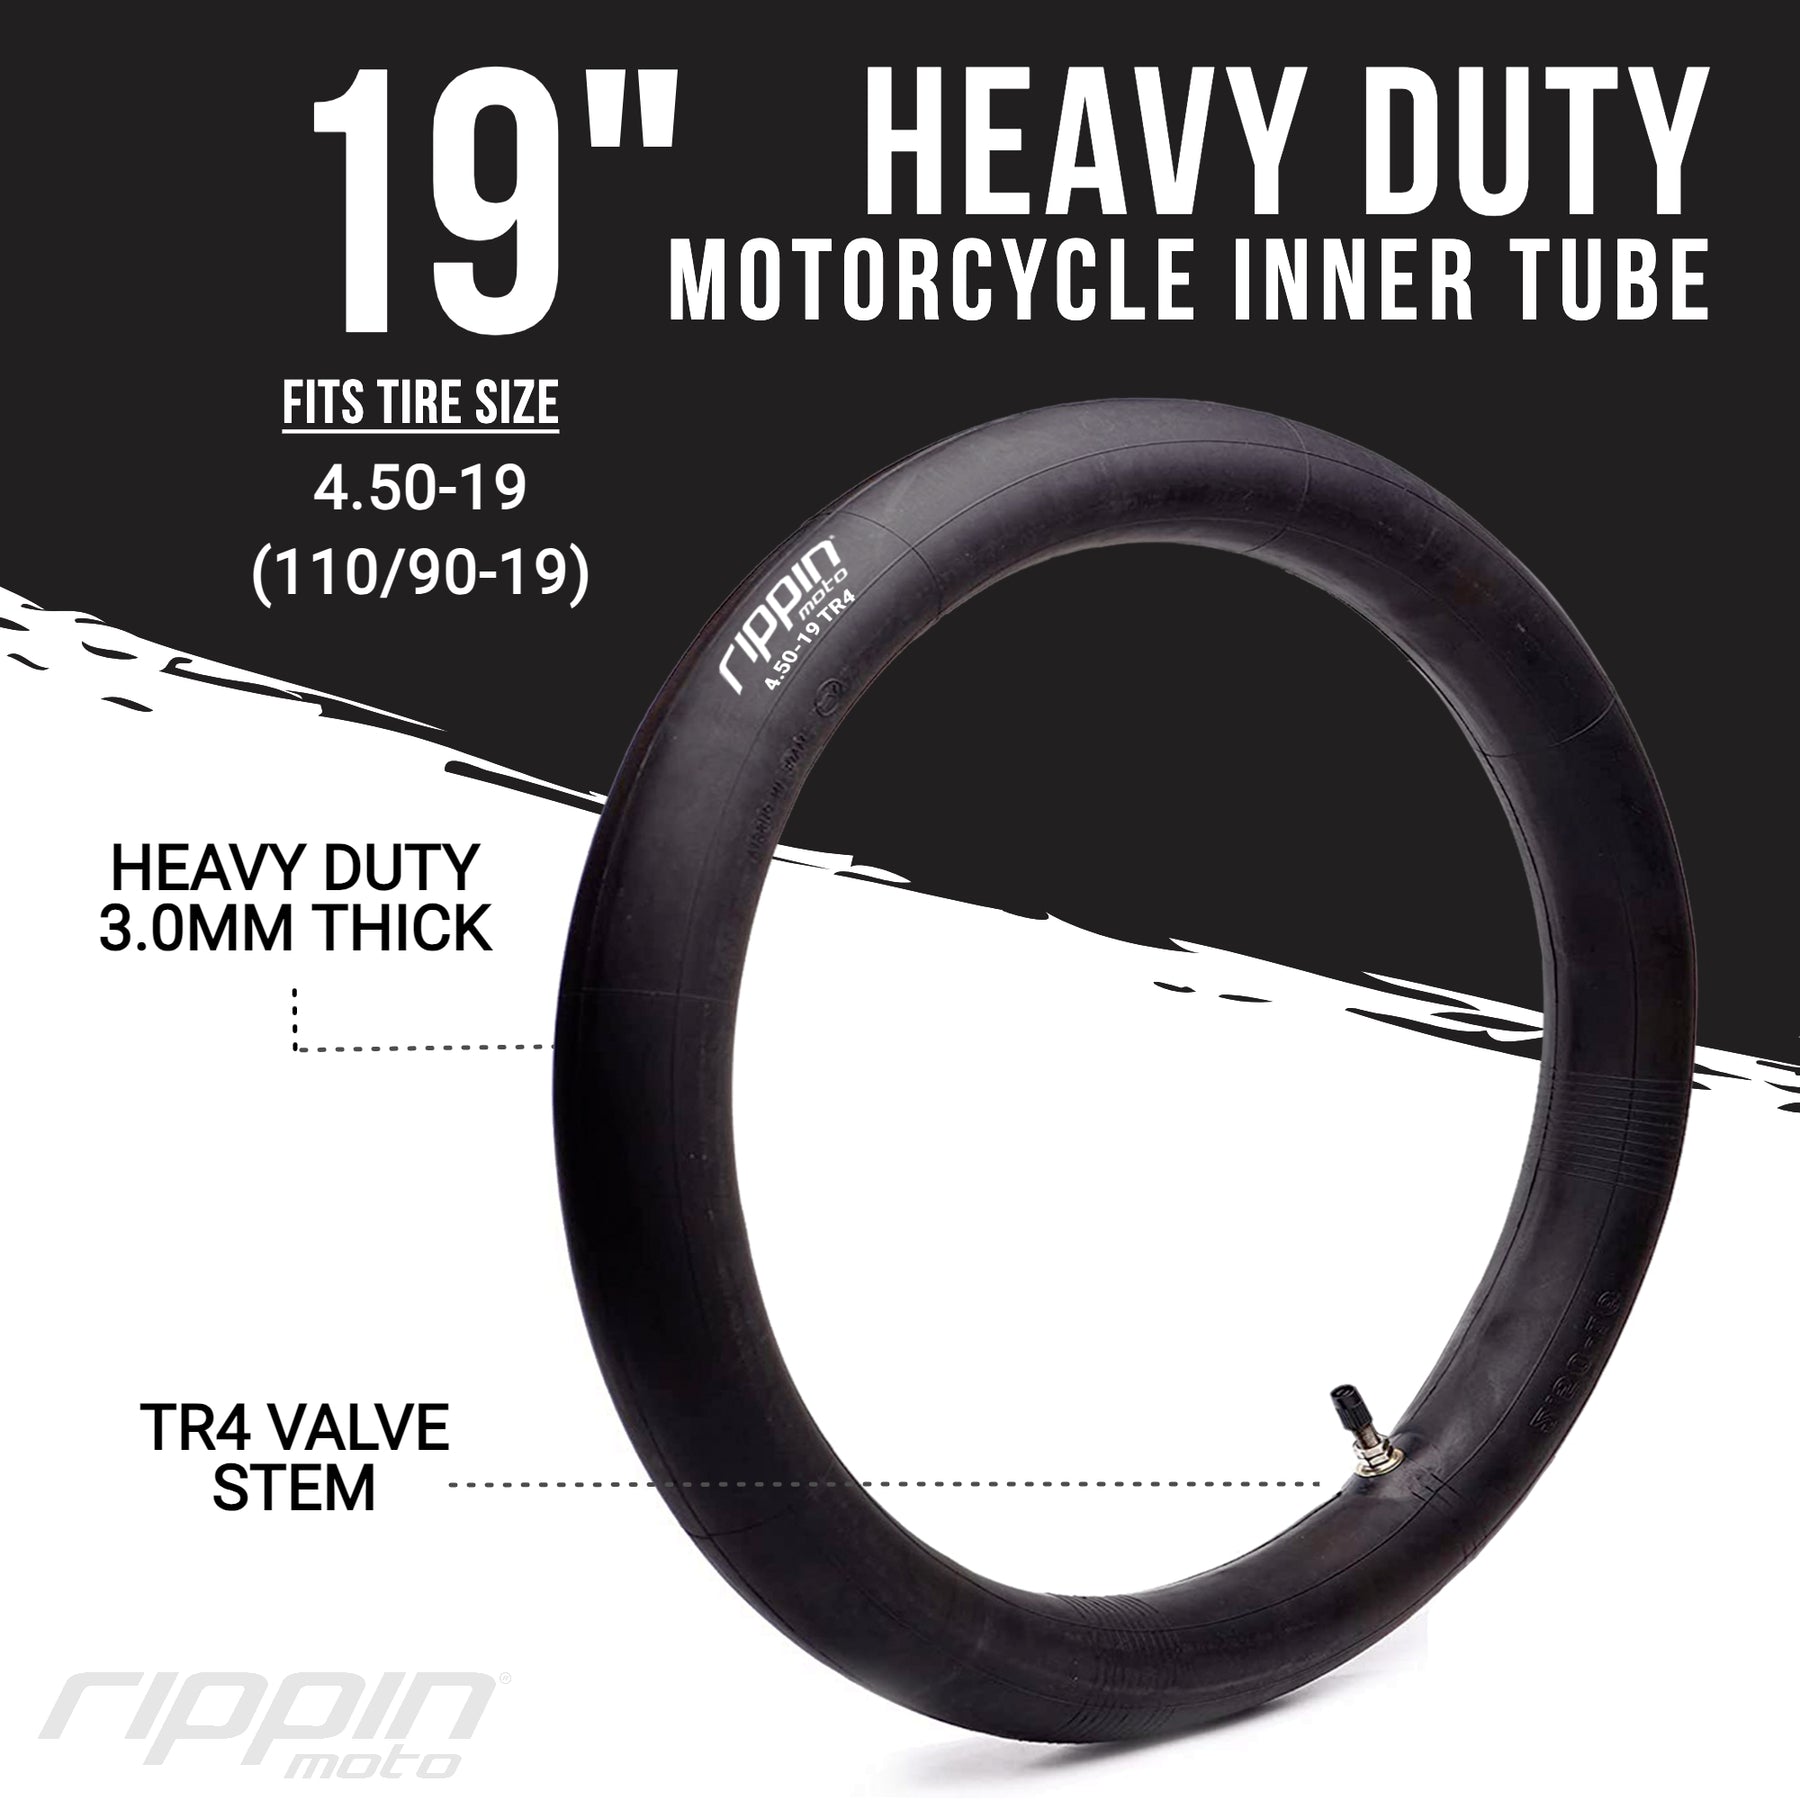  (2-Pack) 110/90-19 (4.50 x 19) - 120/90-19 Motorcycle Inner  Tubes - 19 Dirt Bike Natural Rubber Tubes - Pinch and Puncture-Resistant  Tubes - TR4 Valve Stems - Designed for Off-Road Tires : Automotive